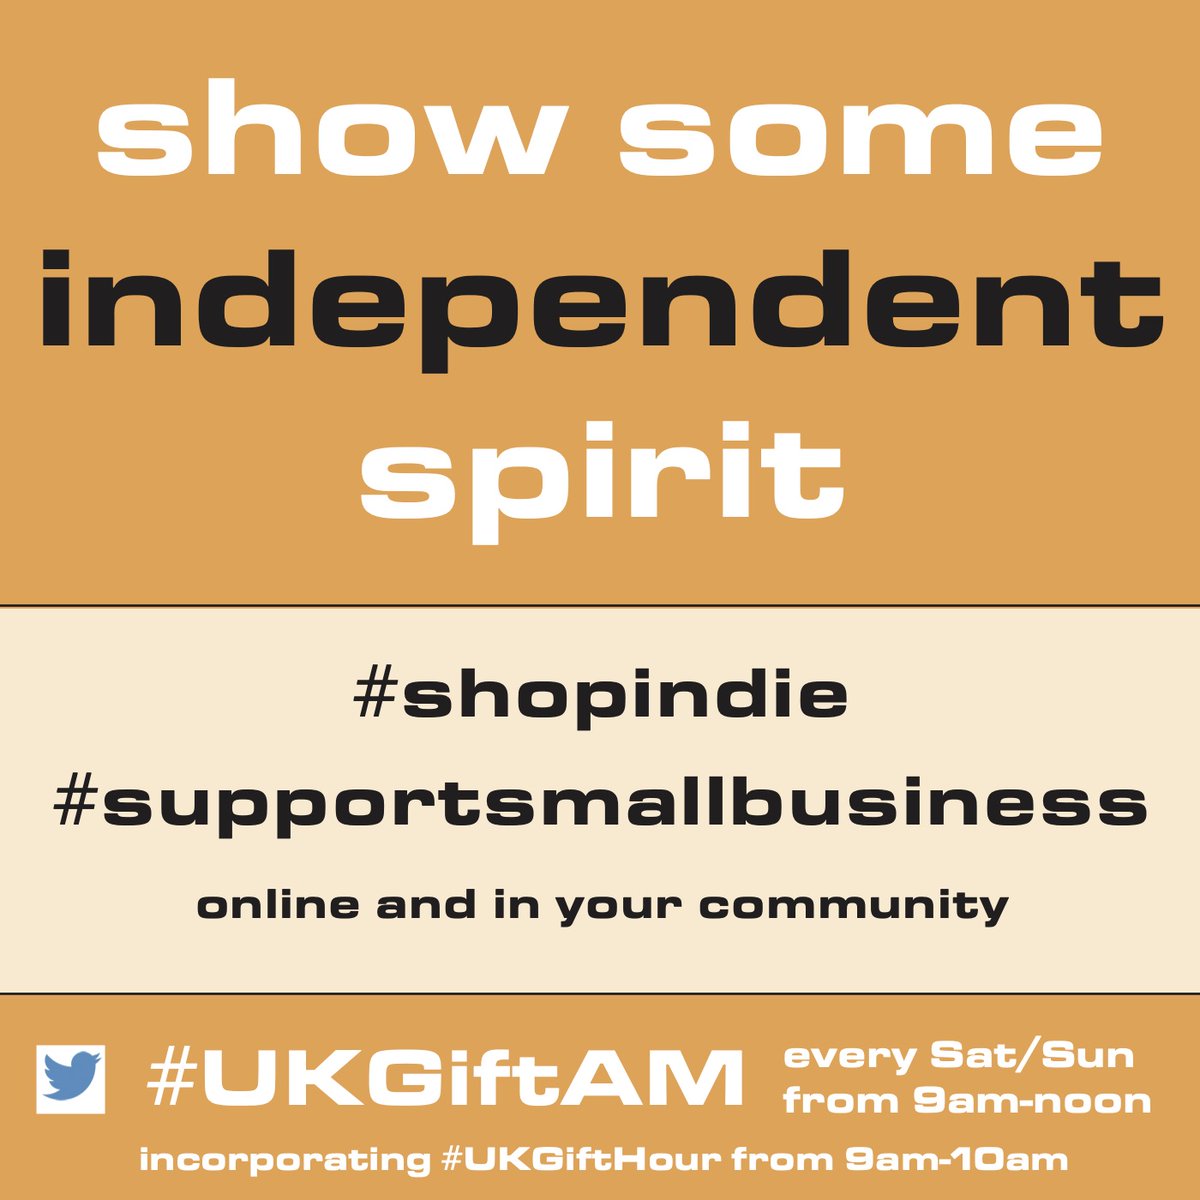 Trending on X without 'blue tick' bias and all the reach penalties that brings isn't what trending on Twitter used to be. But we still manage. And it's better than not doing it at all 🤗 Keep up #shopindie spirits and join us for another supportive #UKGiftHour #UKGIftAM at 9am❤️